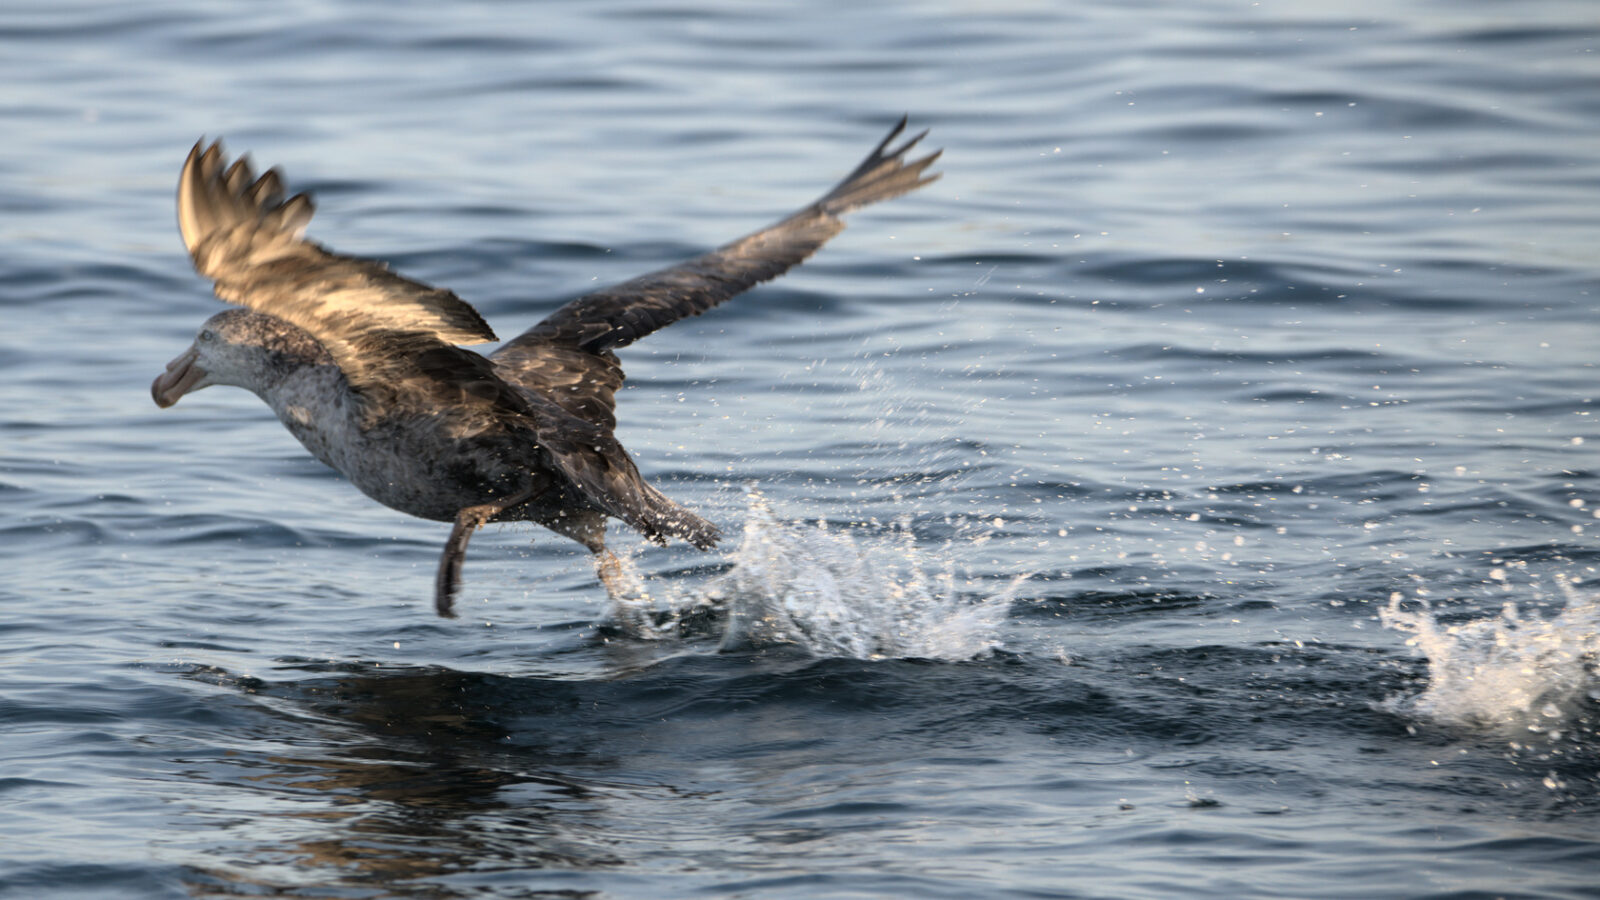 Southern Giant Petrel taking off